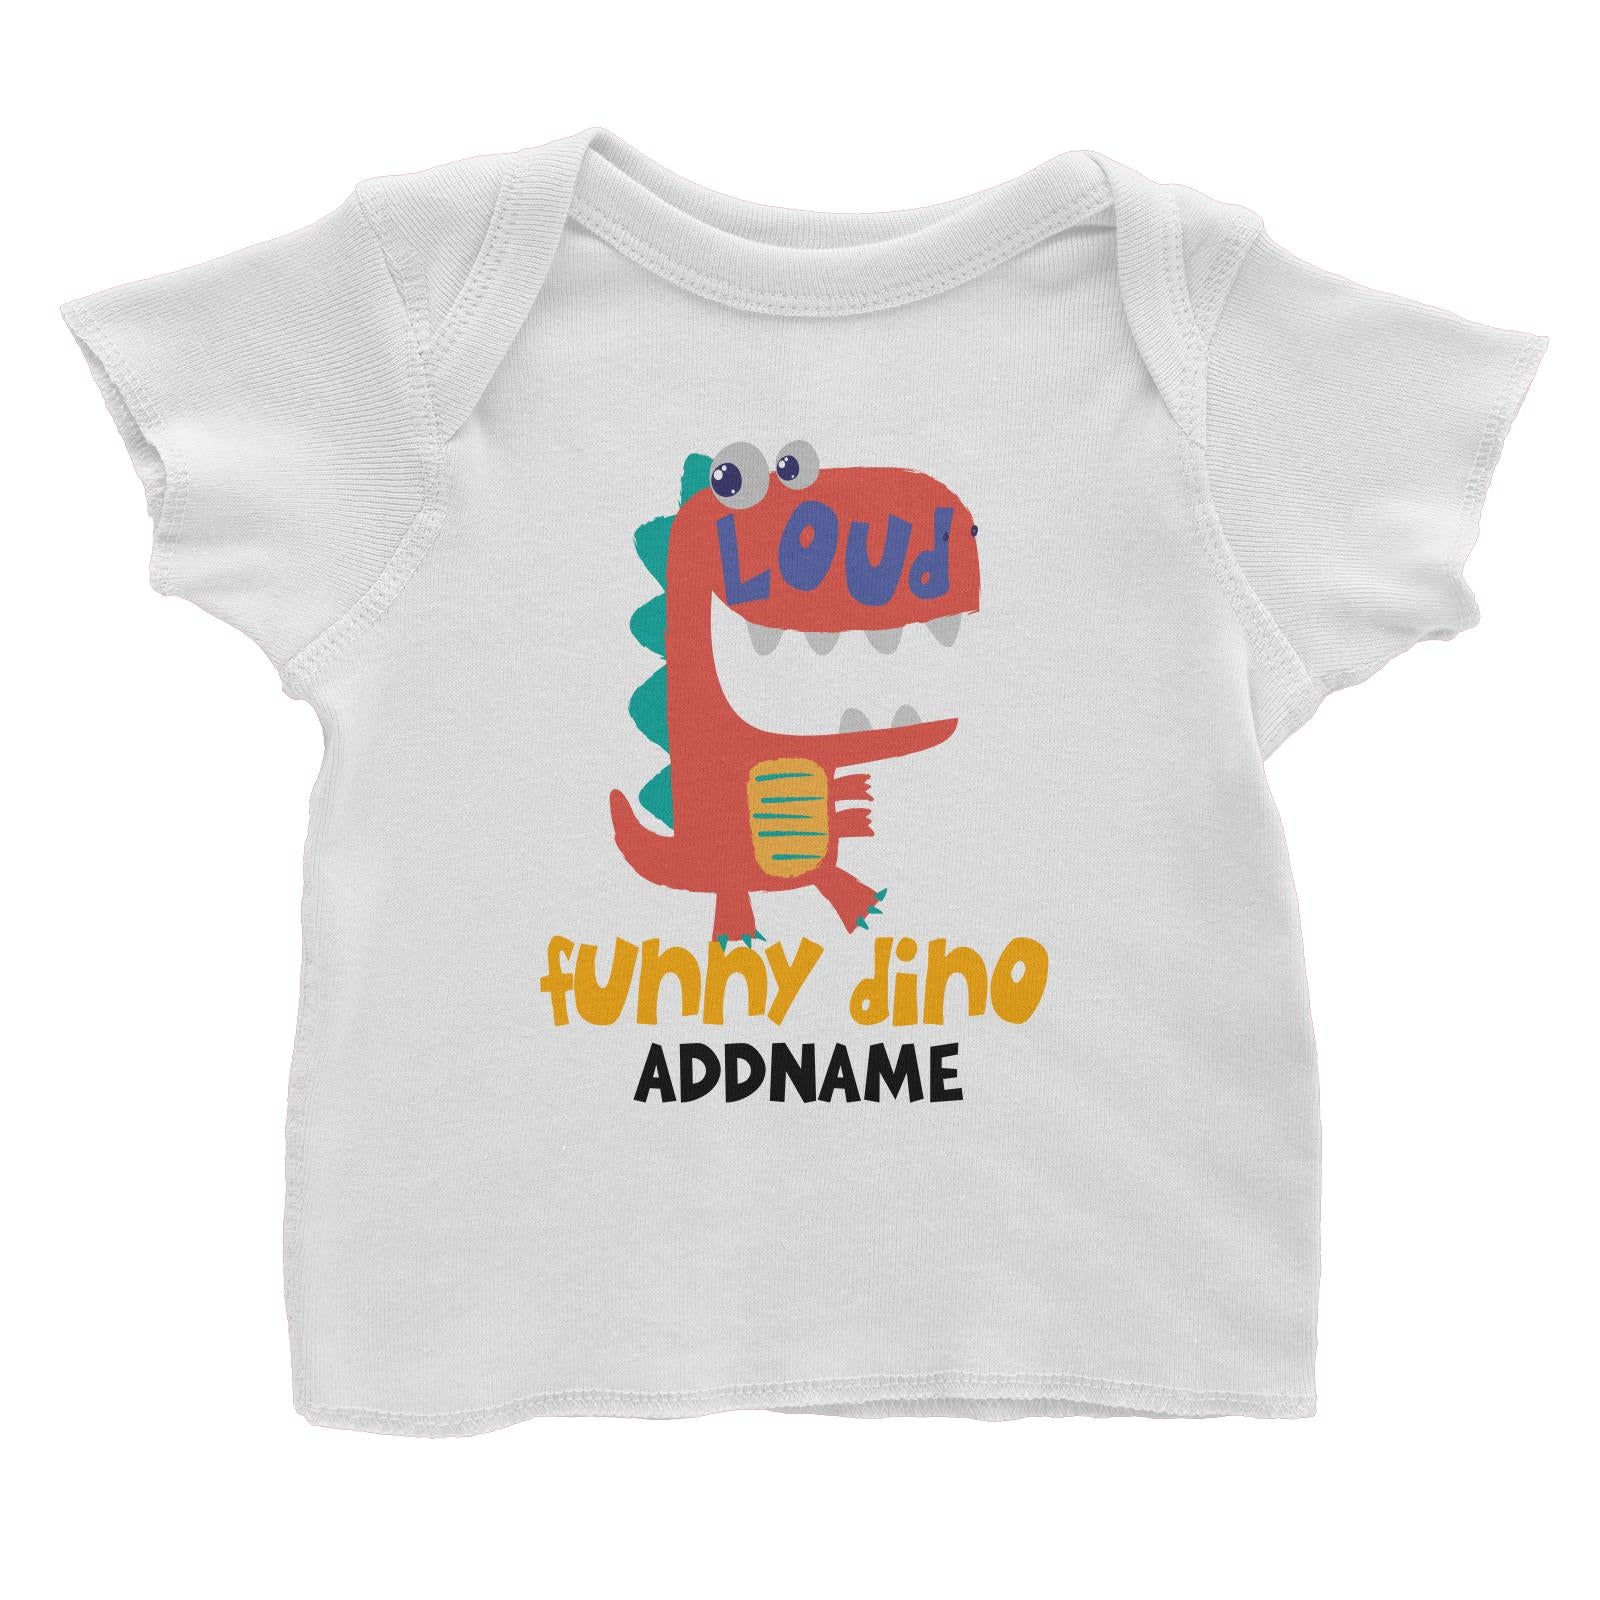 Loud Funny Dino Addname White Baby T-Shirt